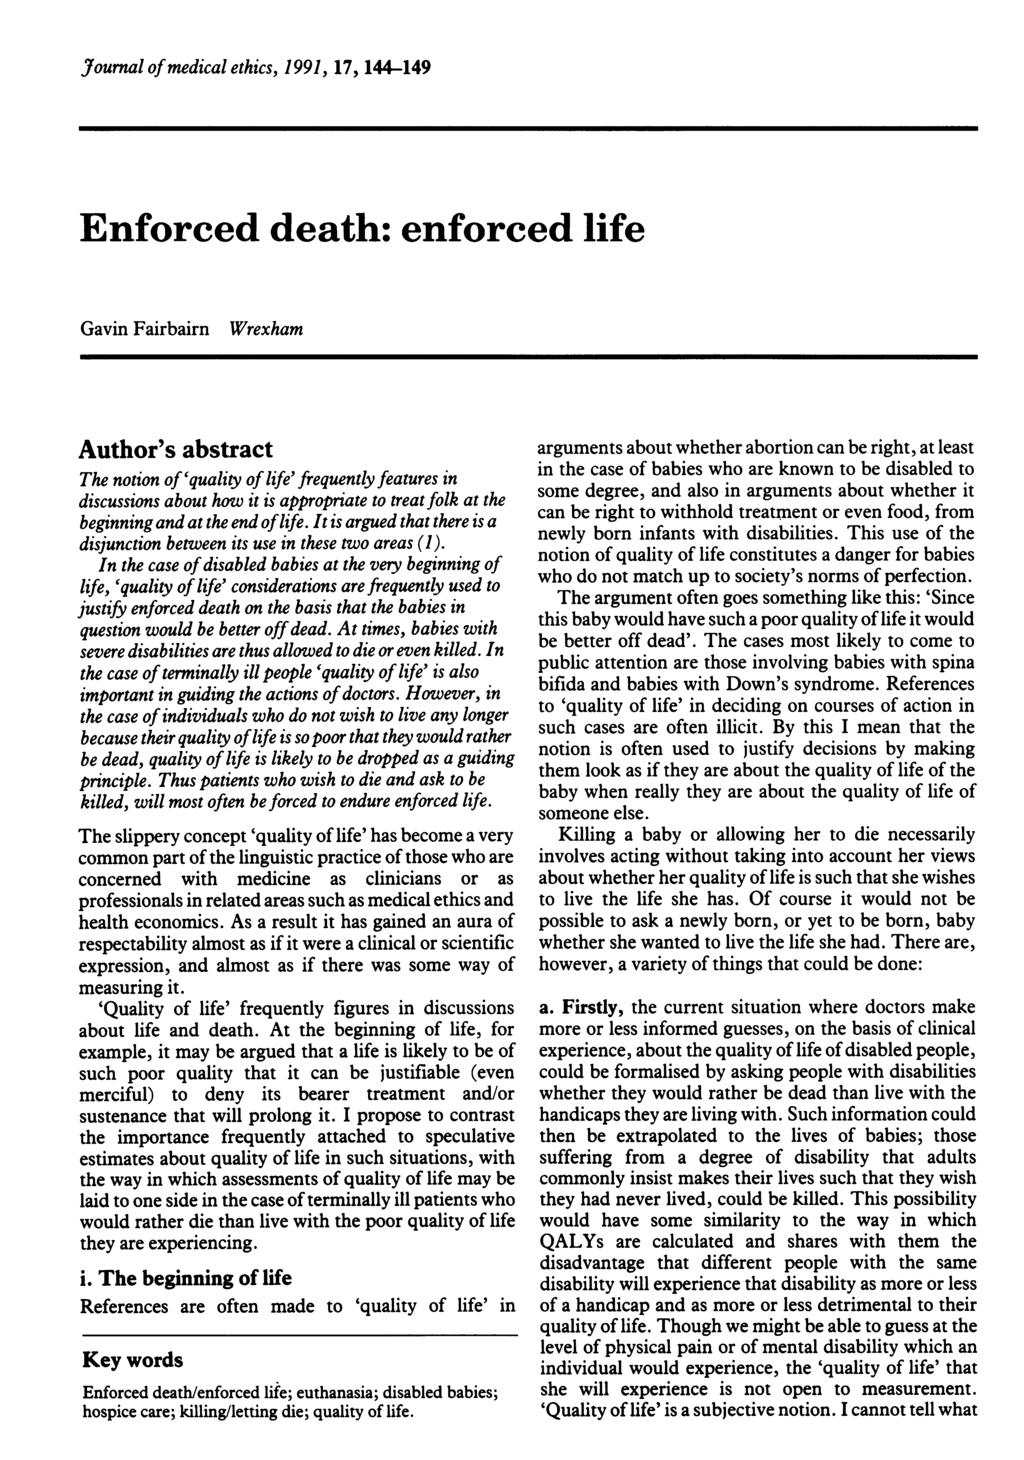 Journal of medical ethics, 1991, 17, 144-149 Enforced death: enforced life Gavin Fairbairn Wrexham Author's abstract The notion of 'quality of life' frequently features in discussions about how it is